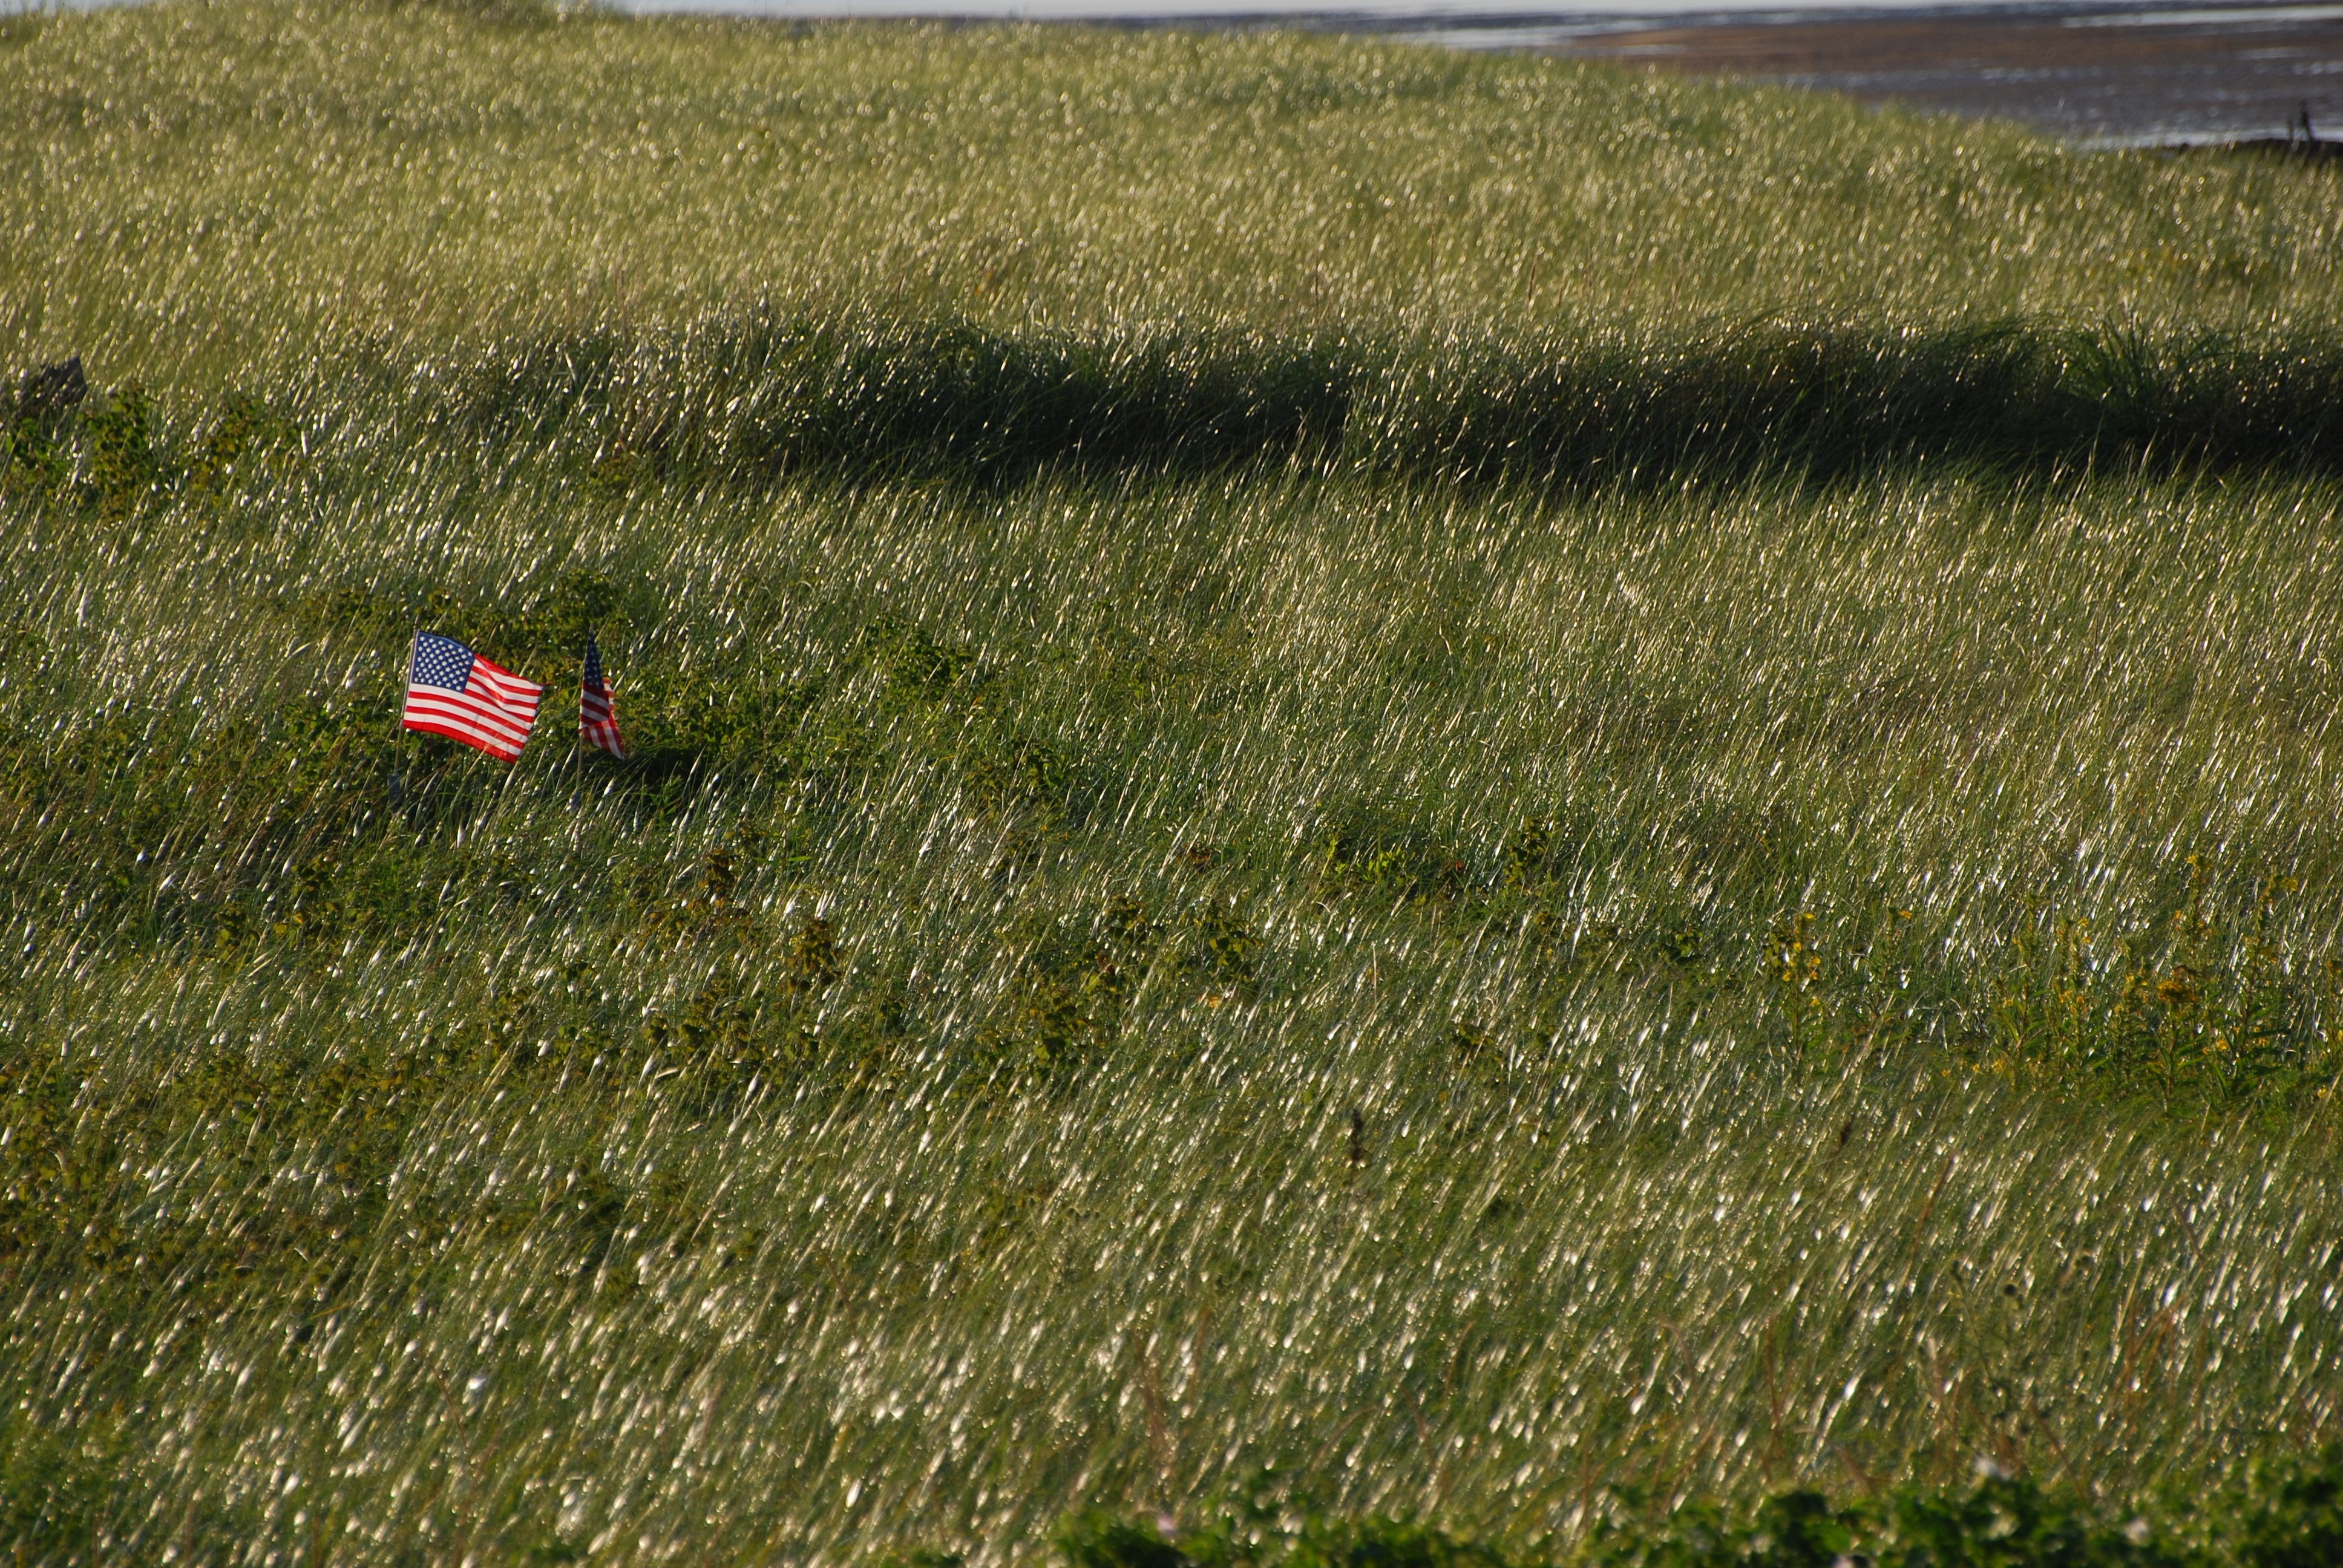 u.s.a. flag in the middle of green grass field during daytime